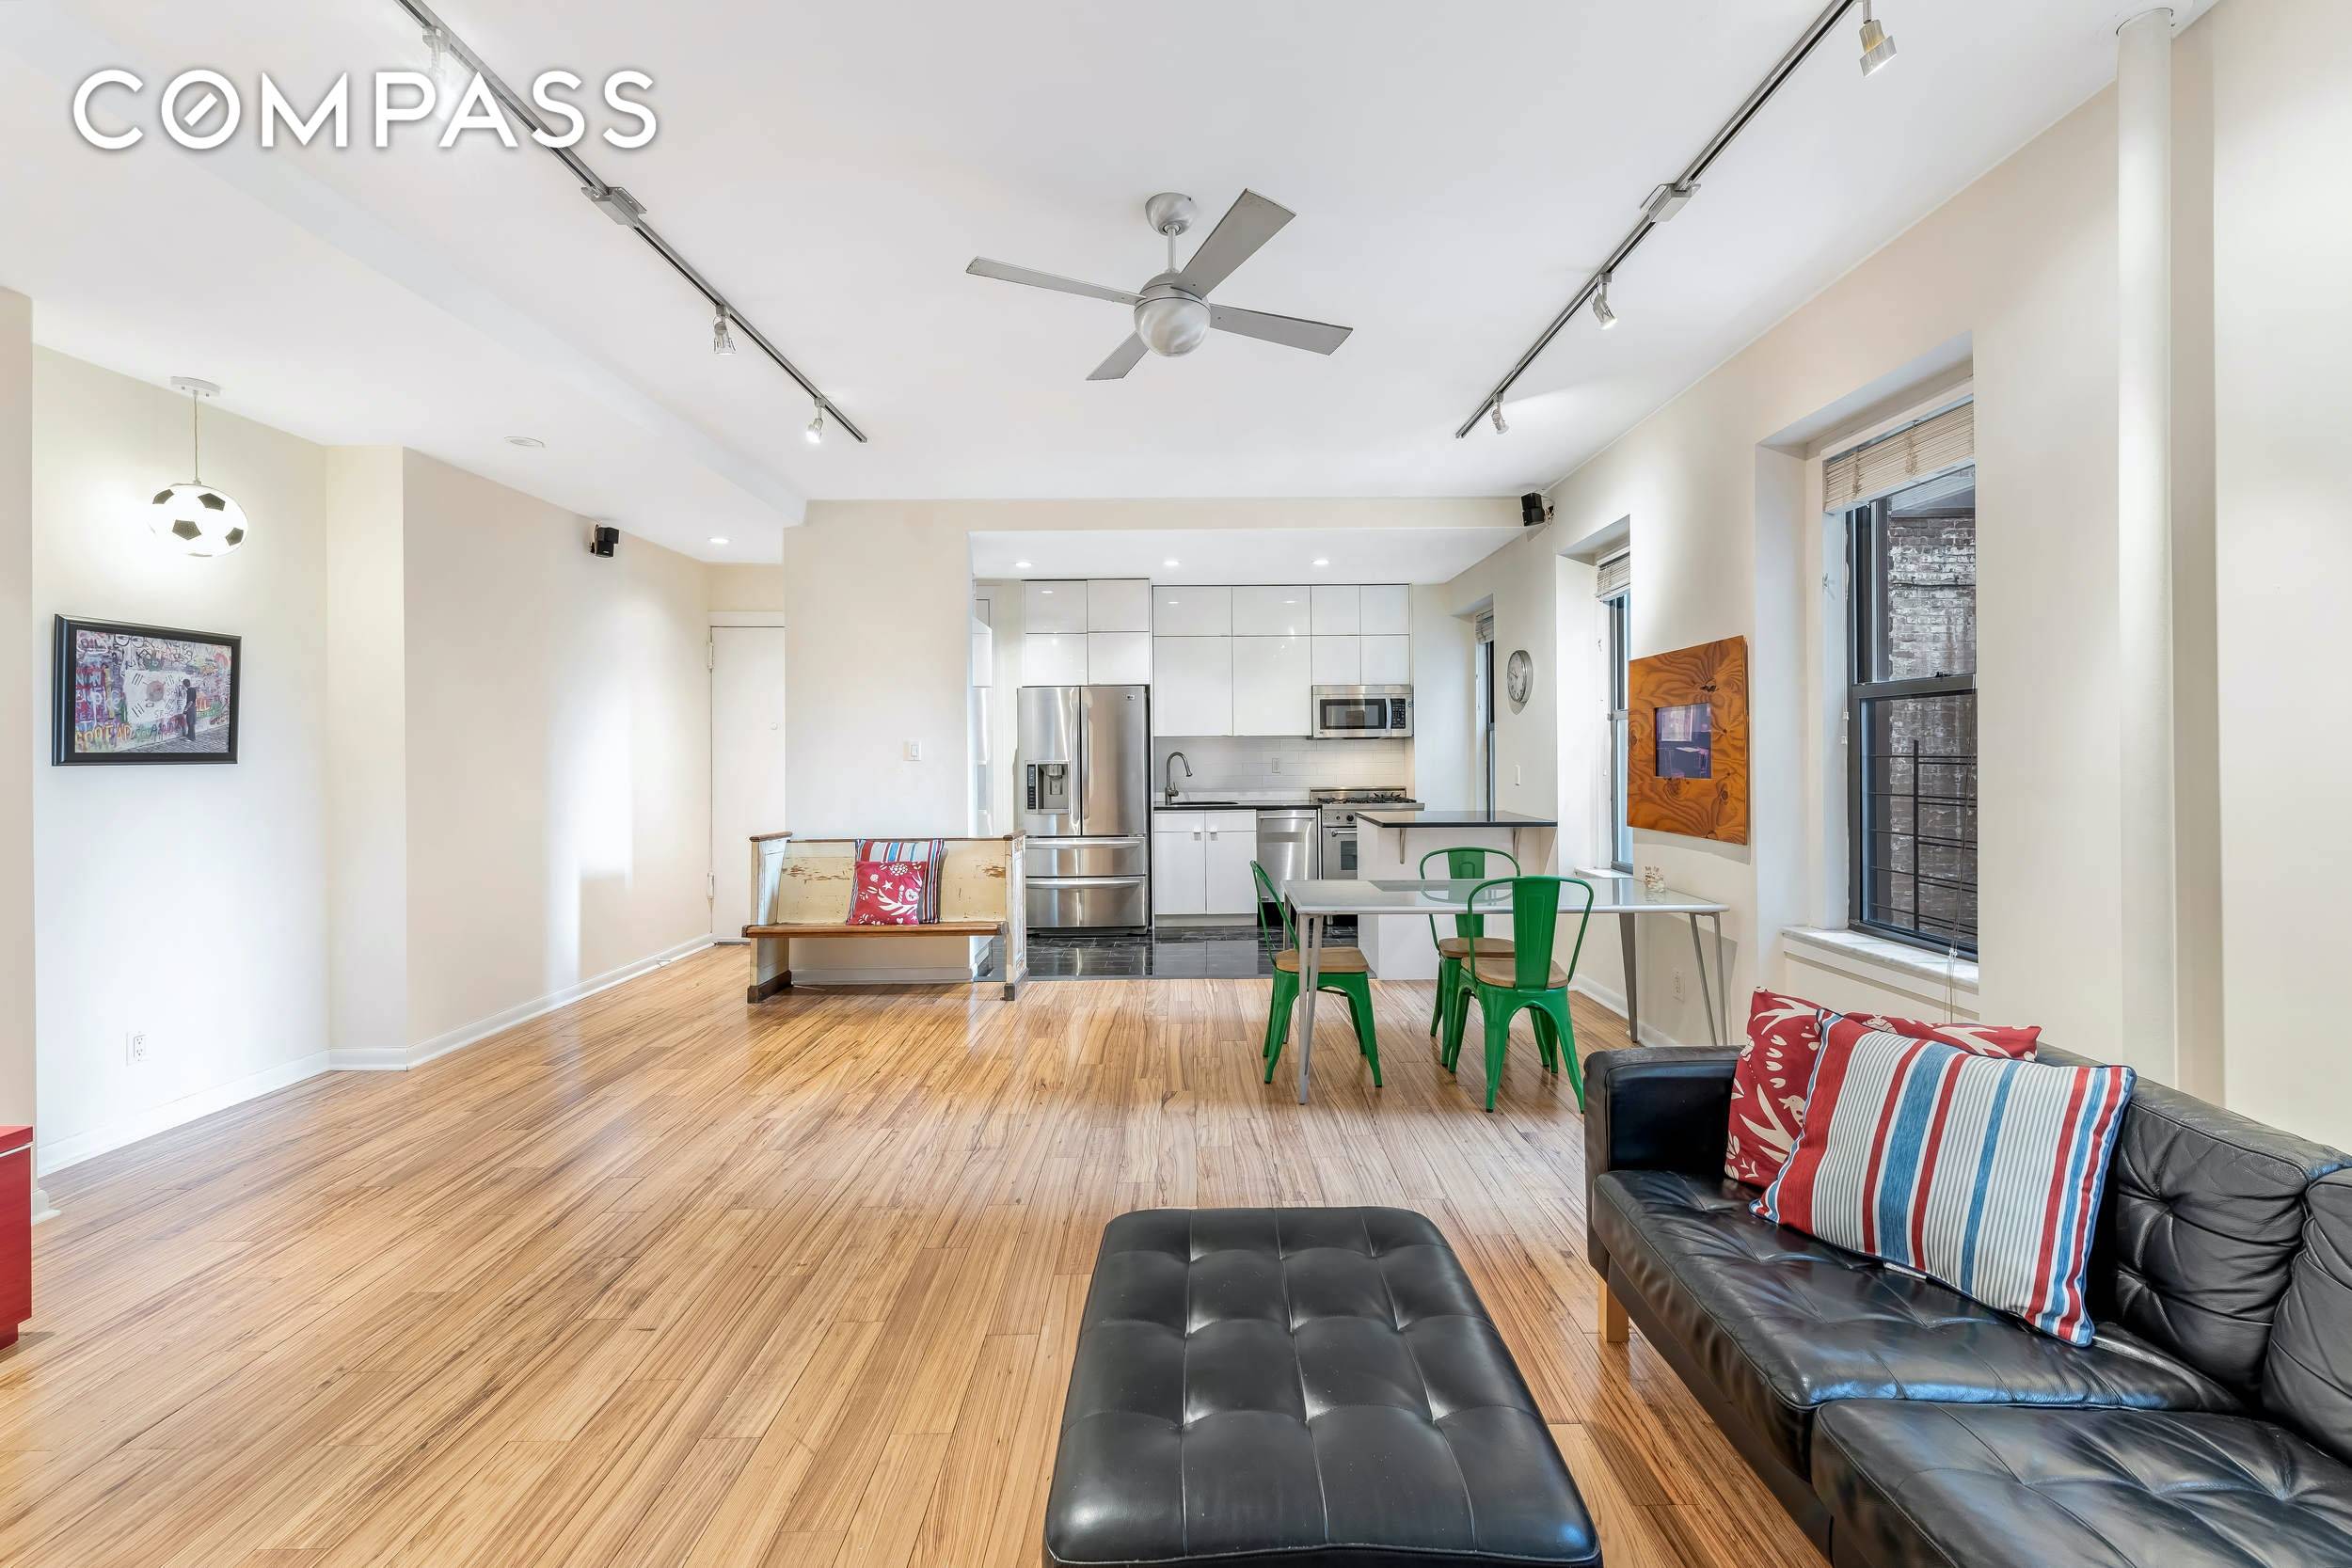 LOFT LIKE 2 BEDROOM NEAR THE HUDSON RIVER This fully renovated one of a kind 2 bedroom 1.